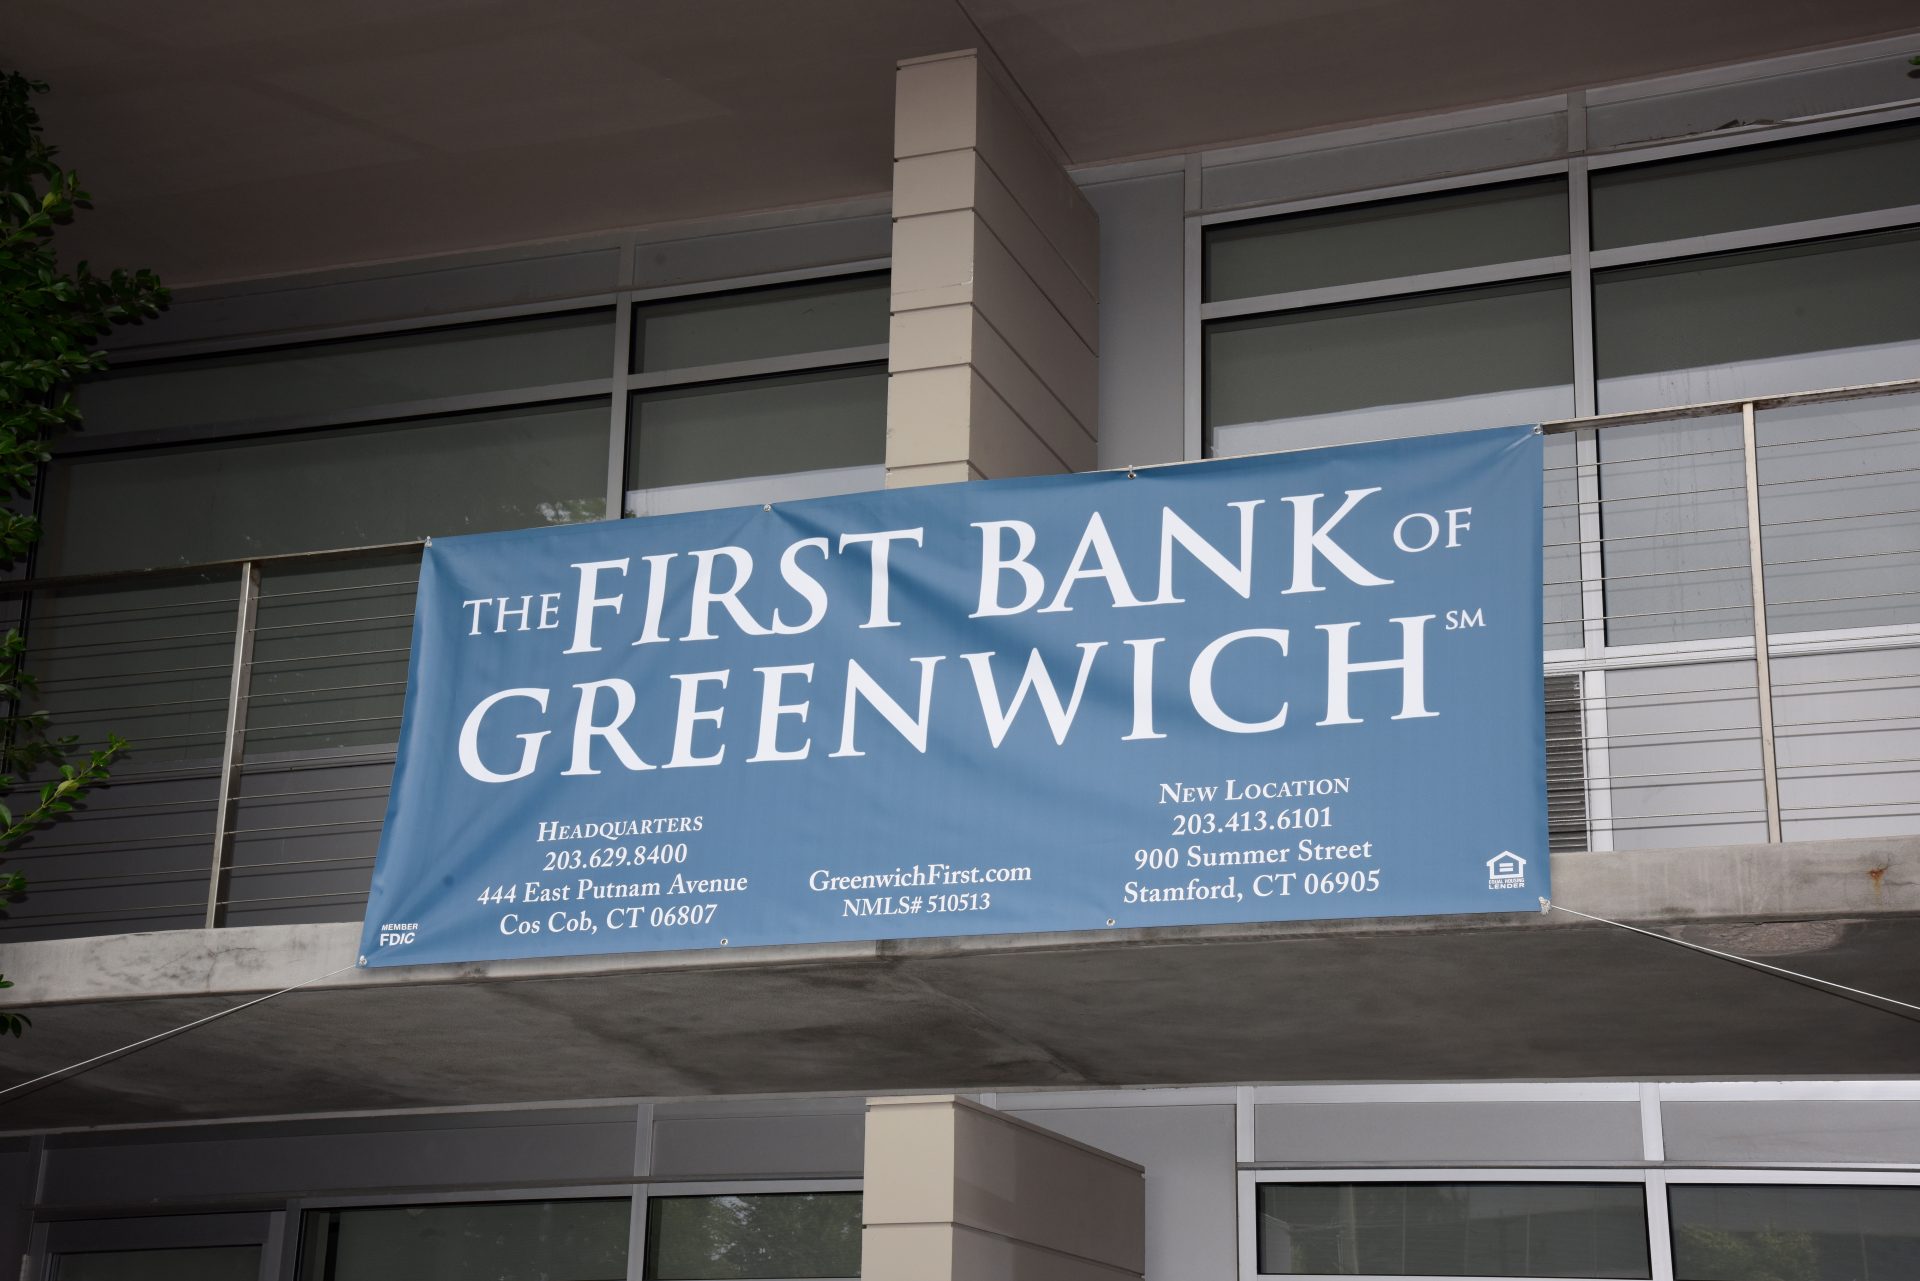 The First Bank of Greenwich hanging on outside balcony.